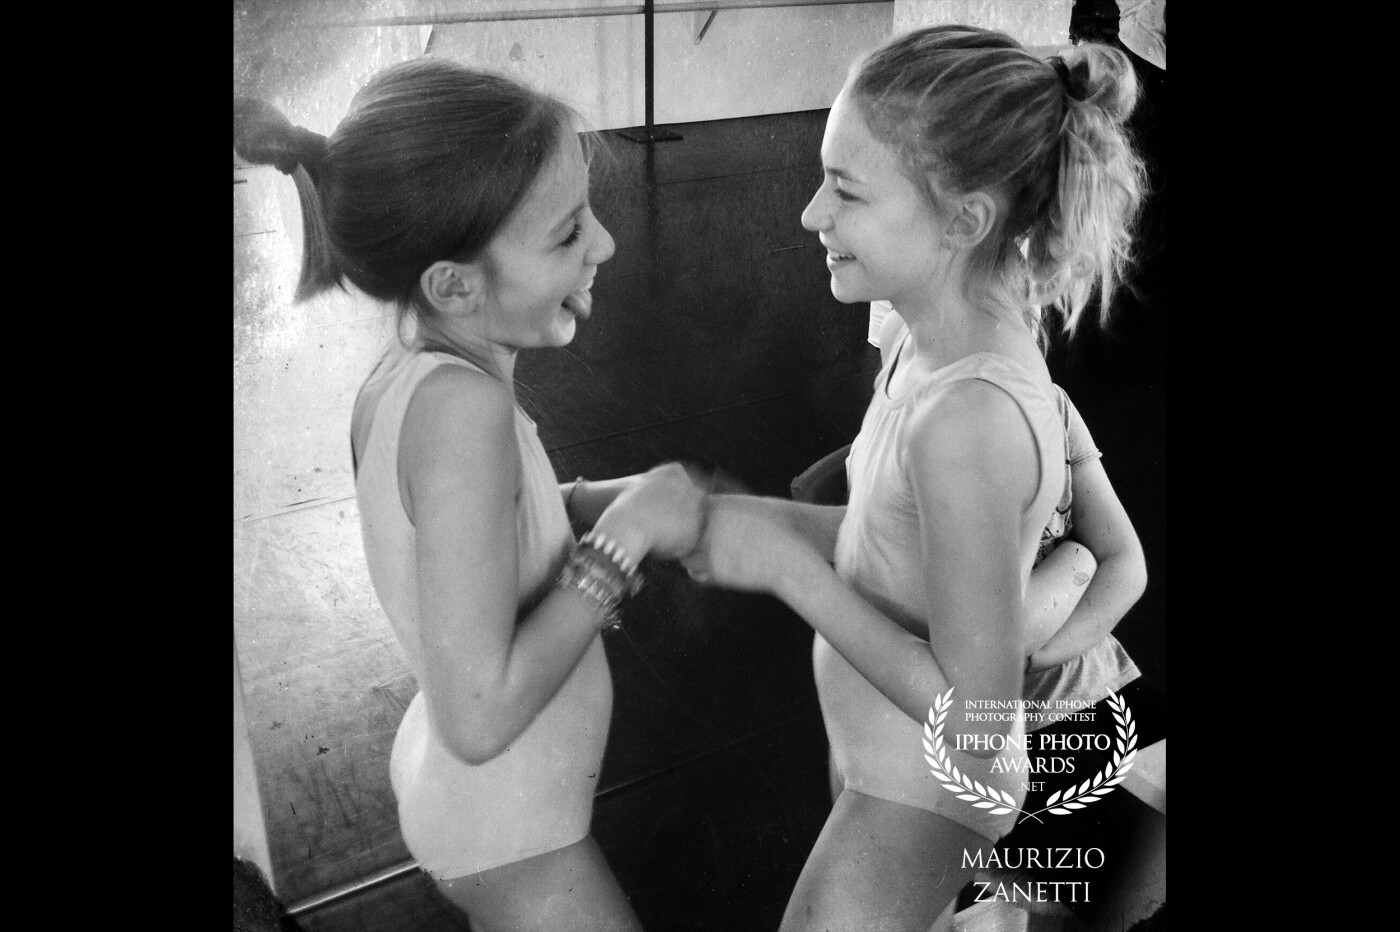 Dance is art but also play, friendships that are born and grow over the years. The backstage is the best place to find out. Picture taken with iPhone, no post production except the transition from color to black and white.